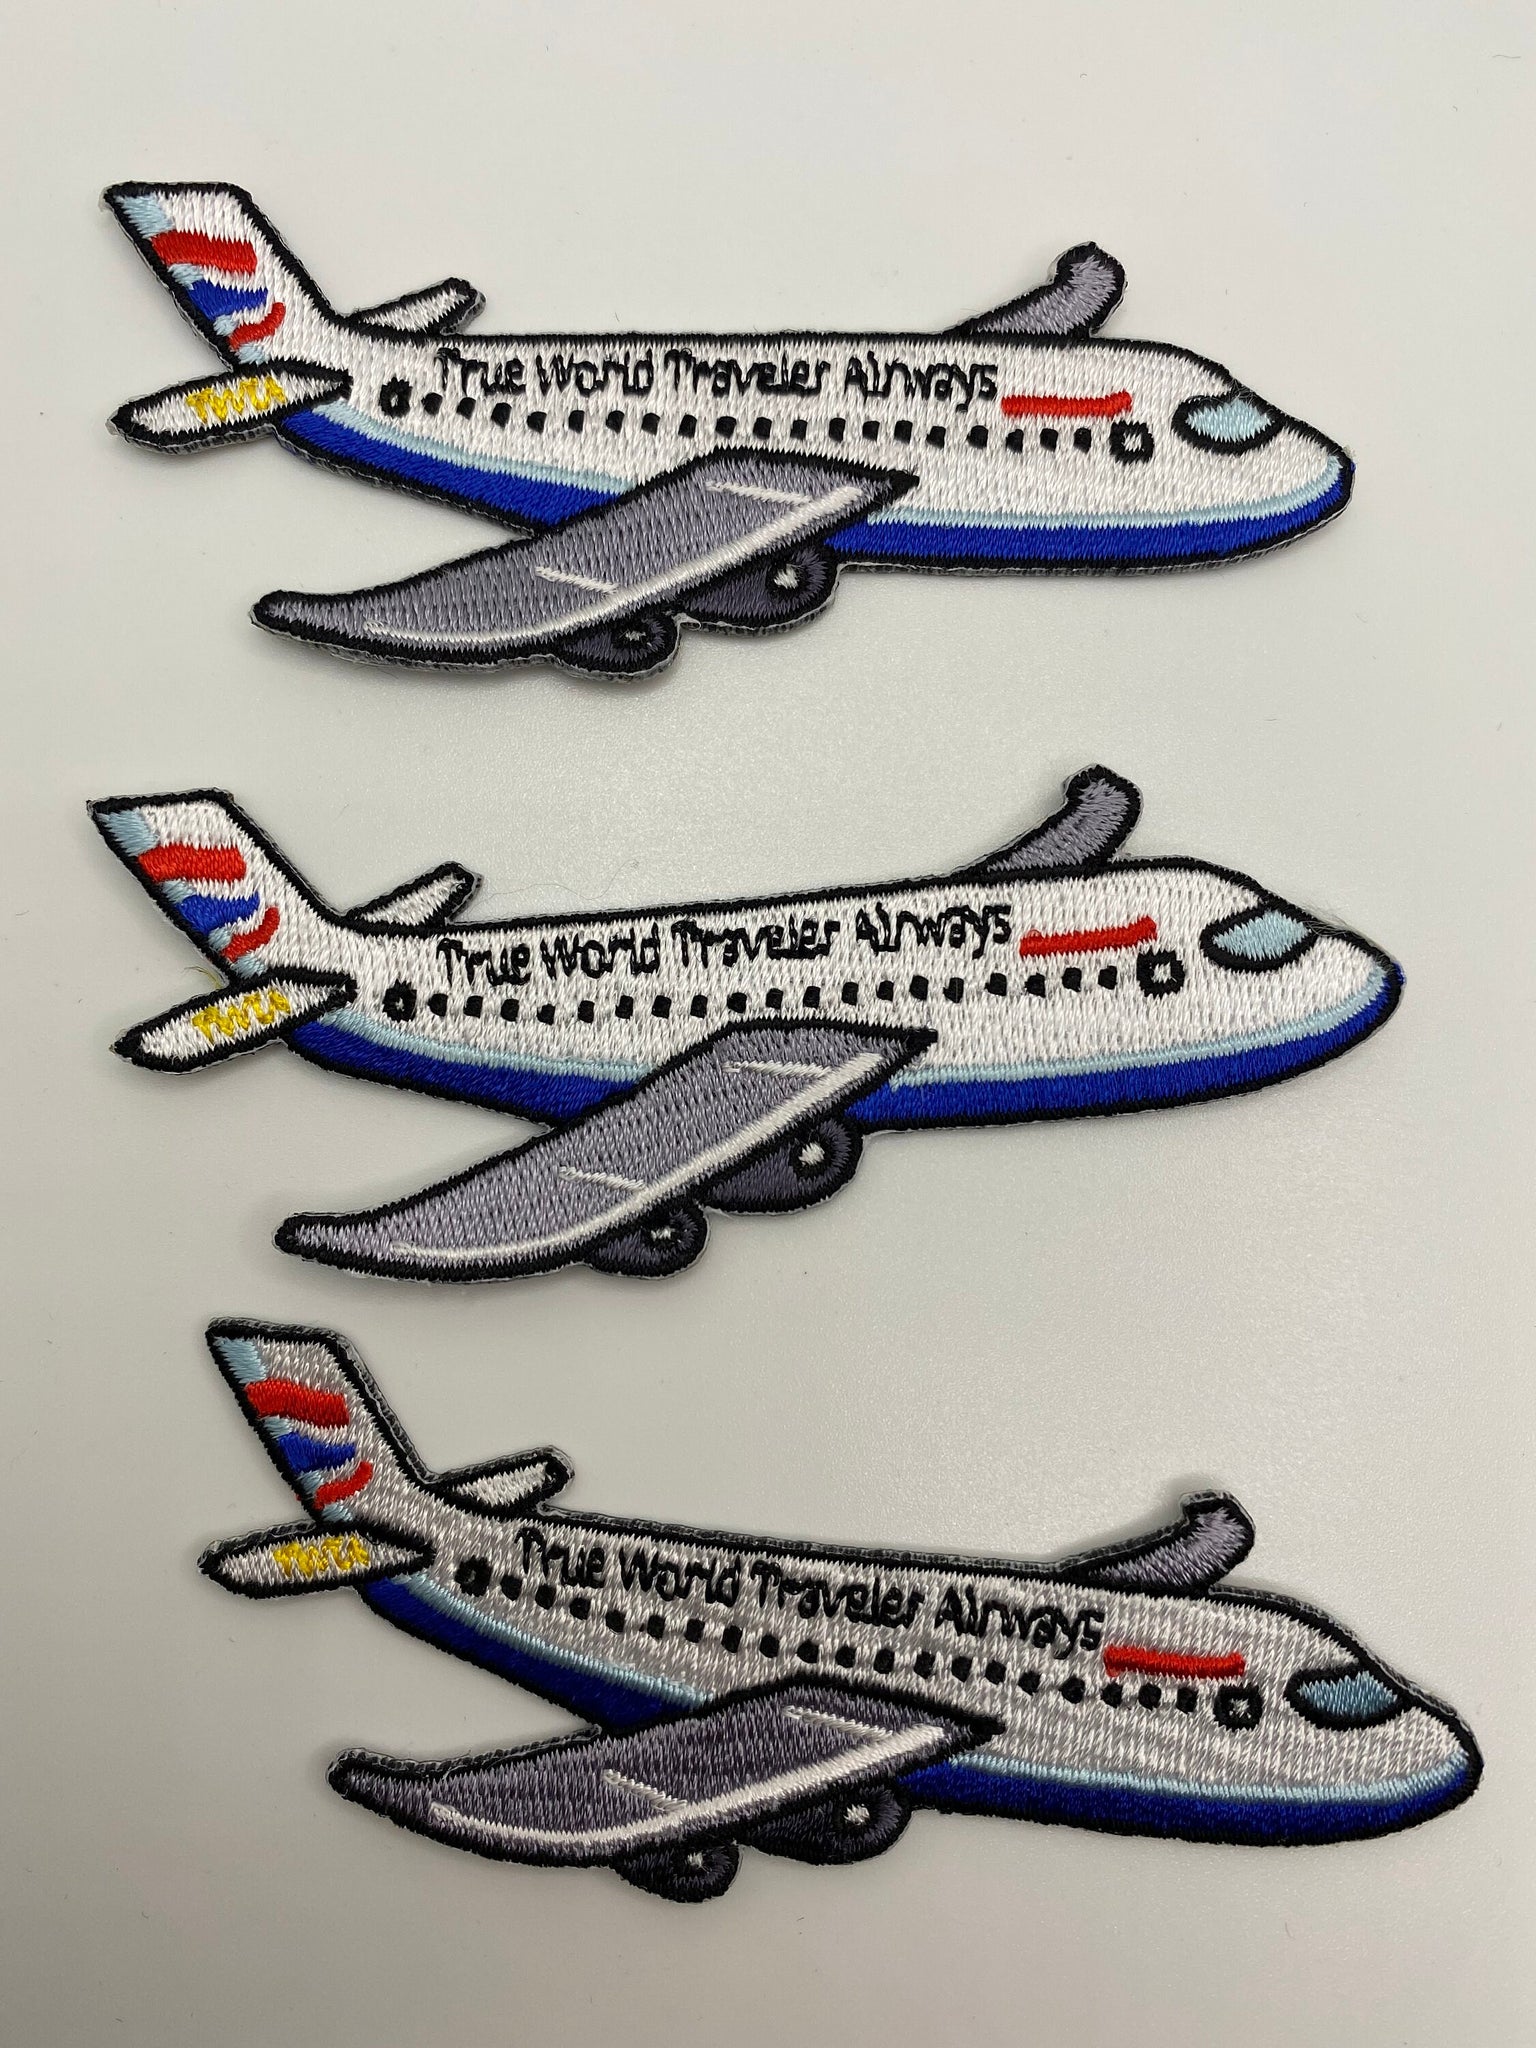 New, "True World Traveler Airways" Iron-on Embroidered Patch, Size 4" Patch, Wanderlust Travel Patch, 1 pc